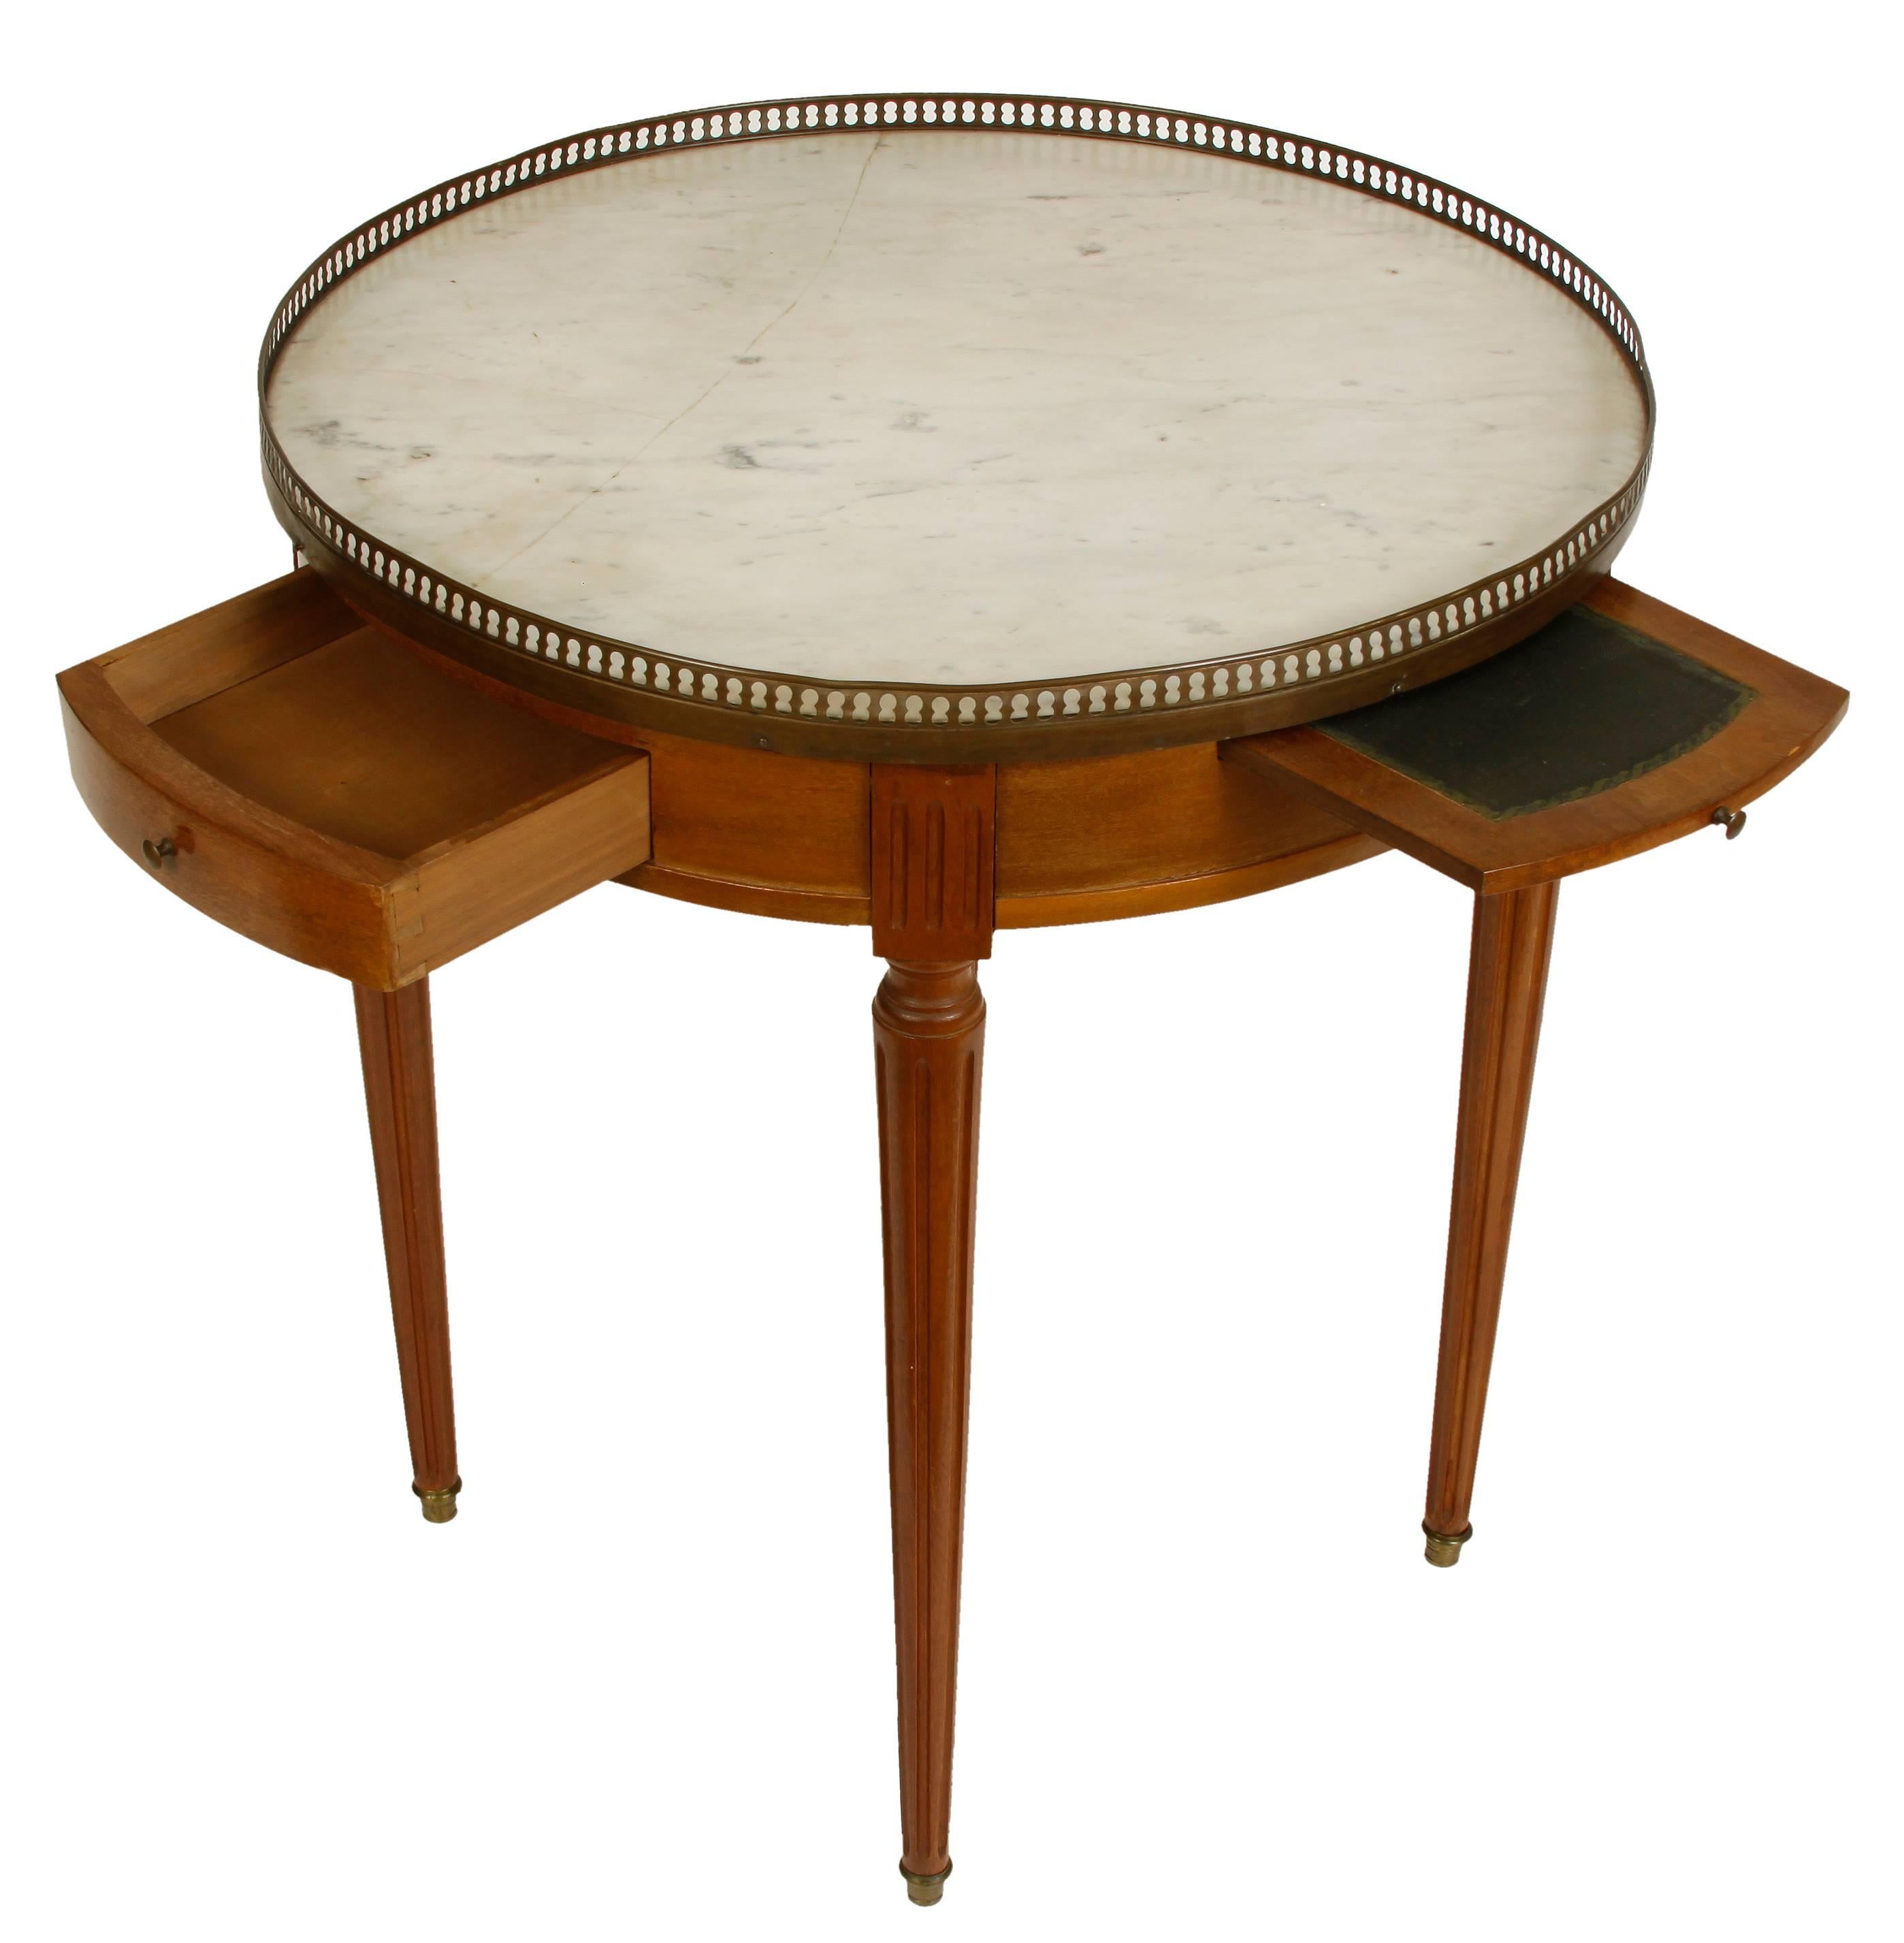 French Bouillotte table with white marble top and reticulated brass gallery edge.